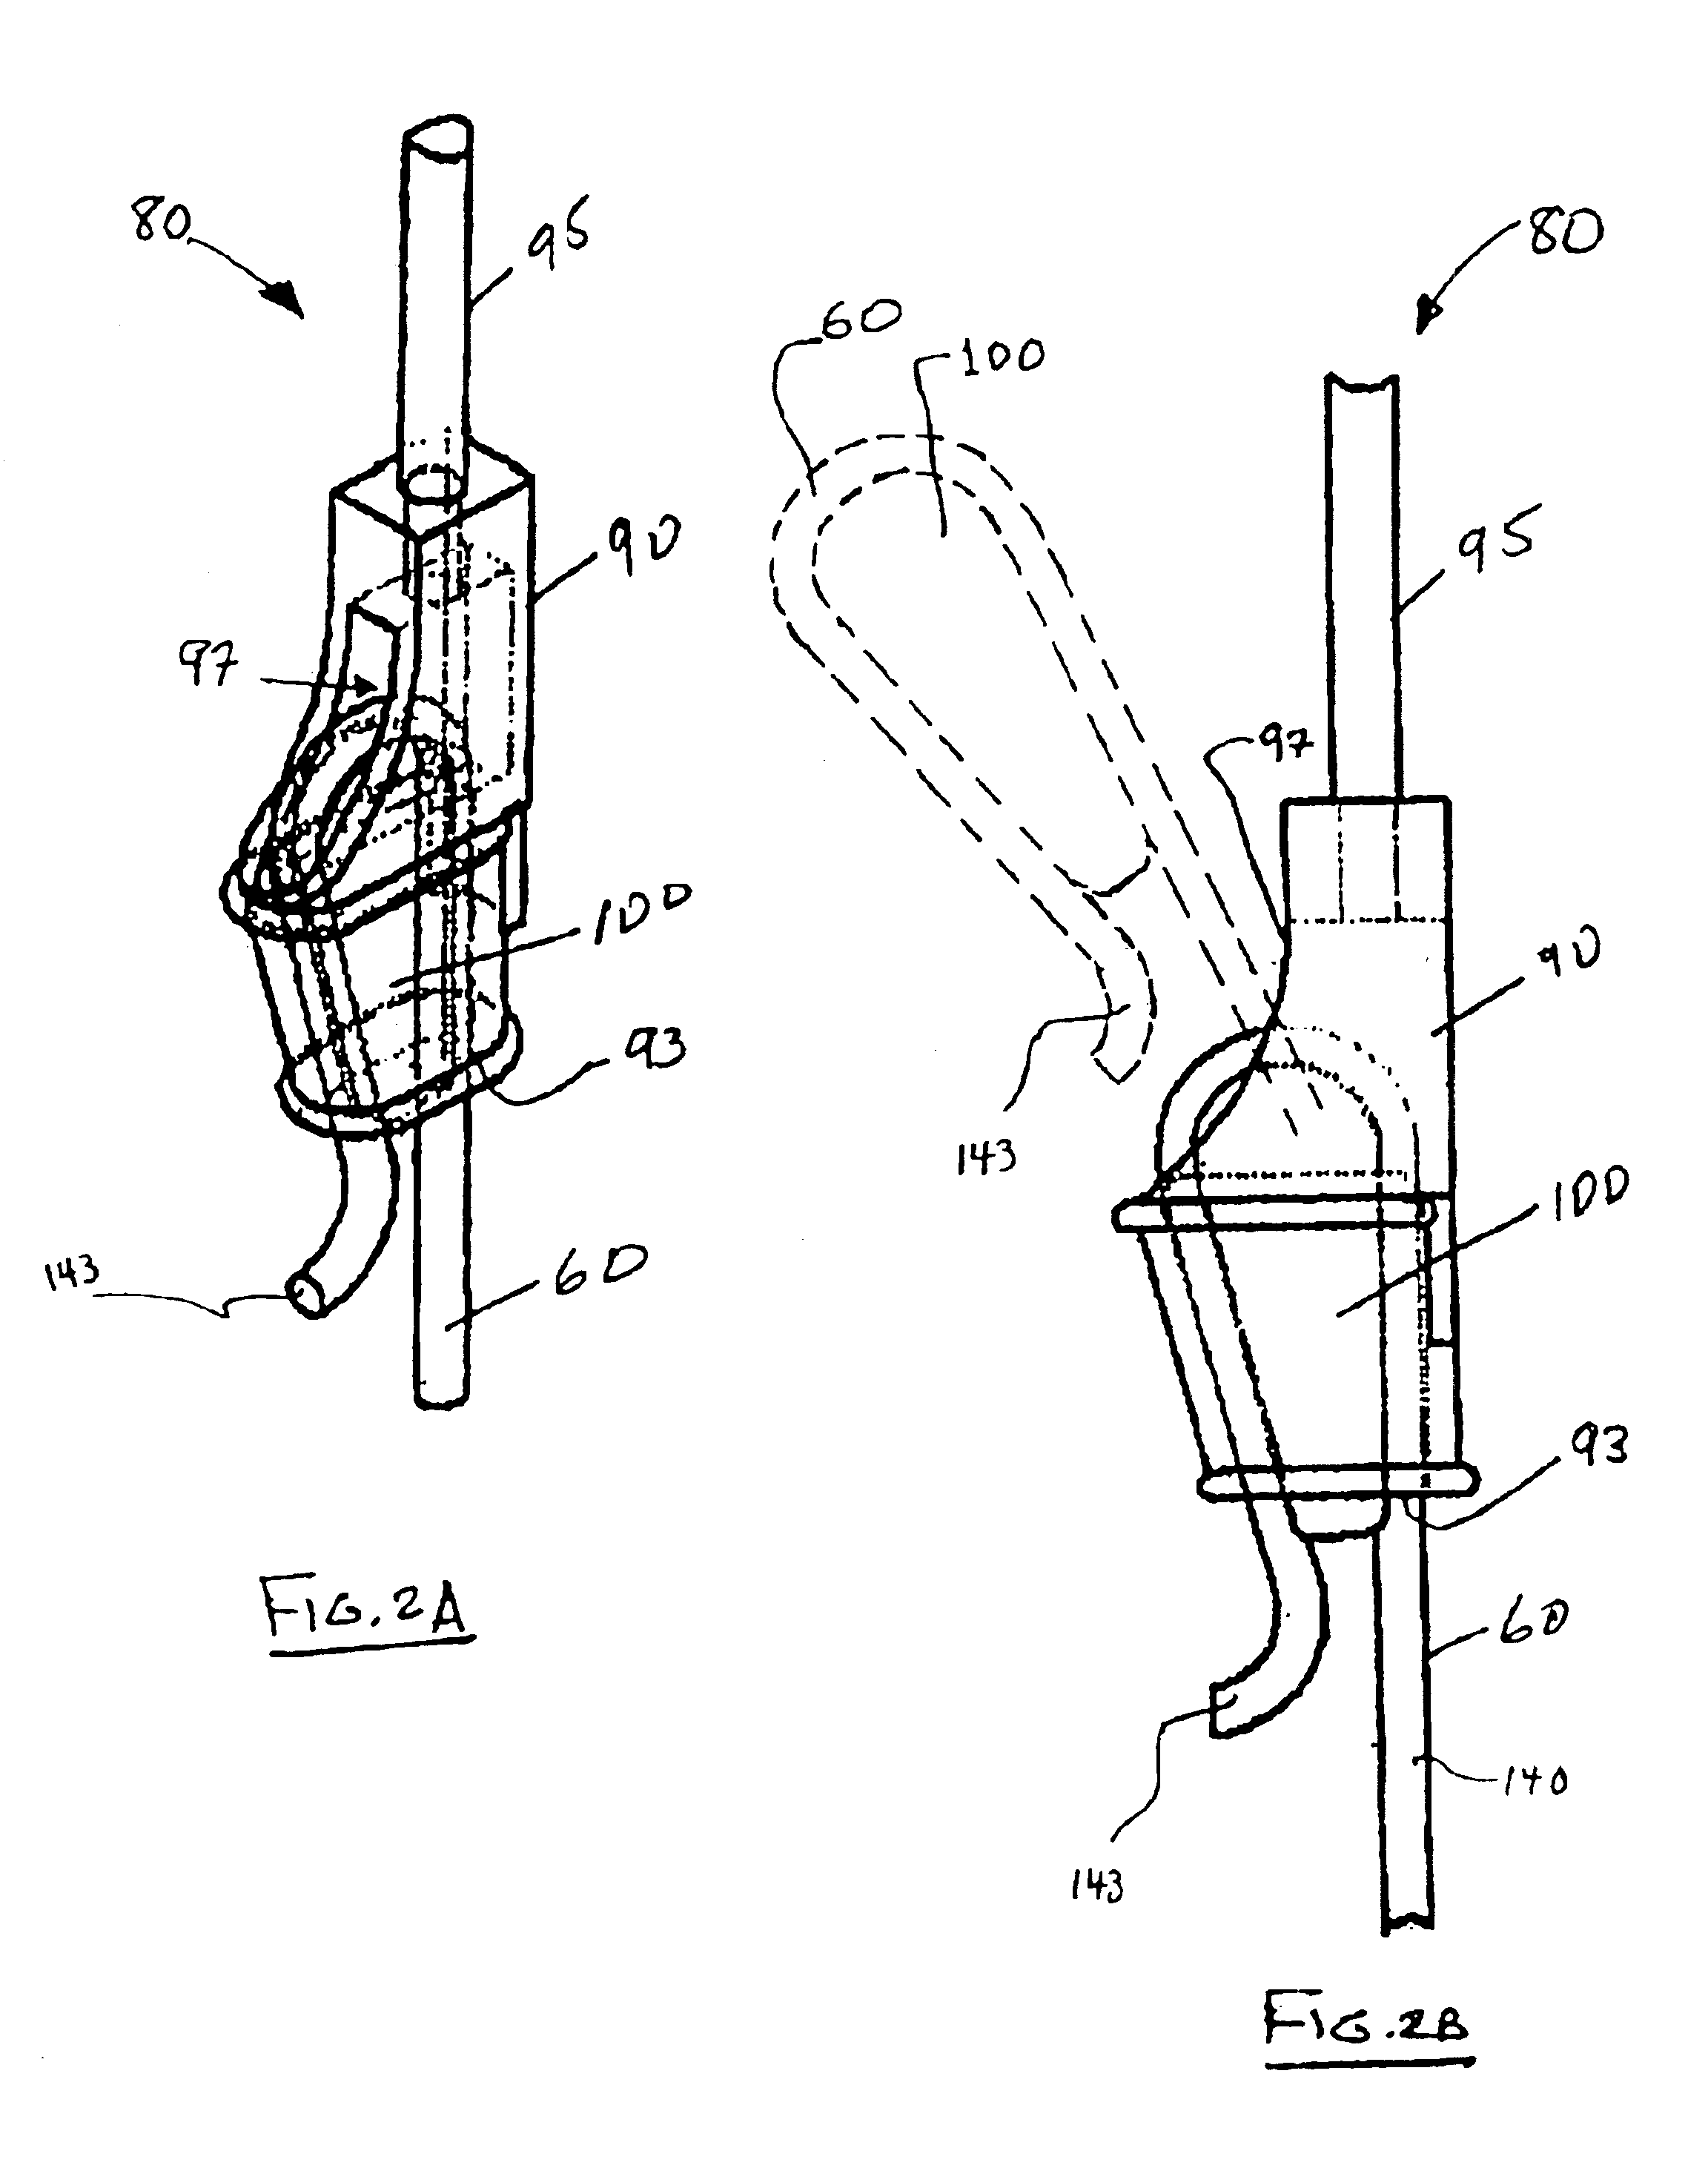 Termination device for an aramid-based elevator rope